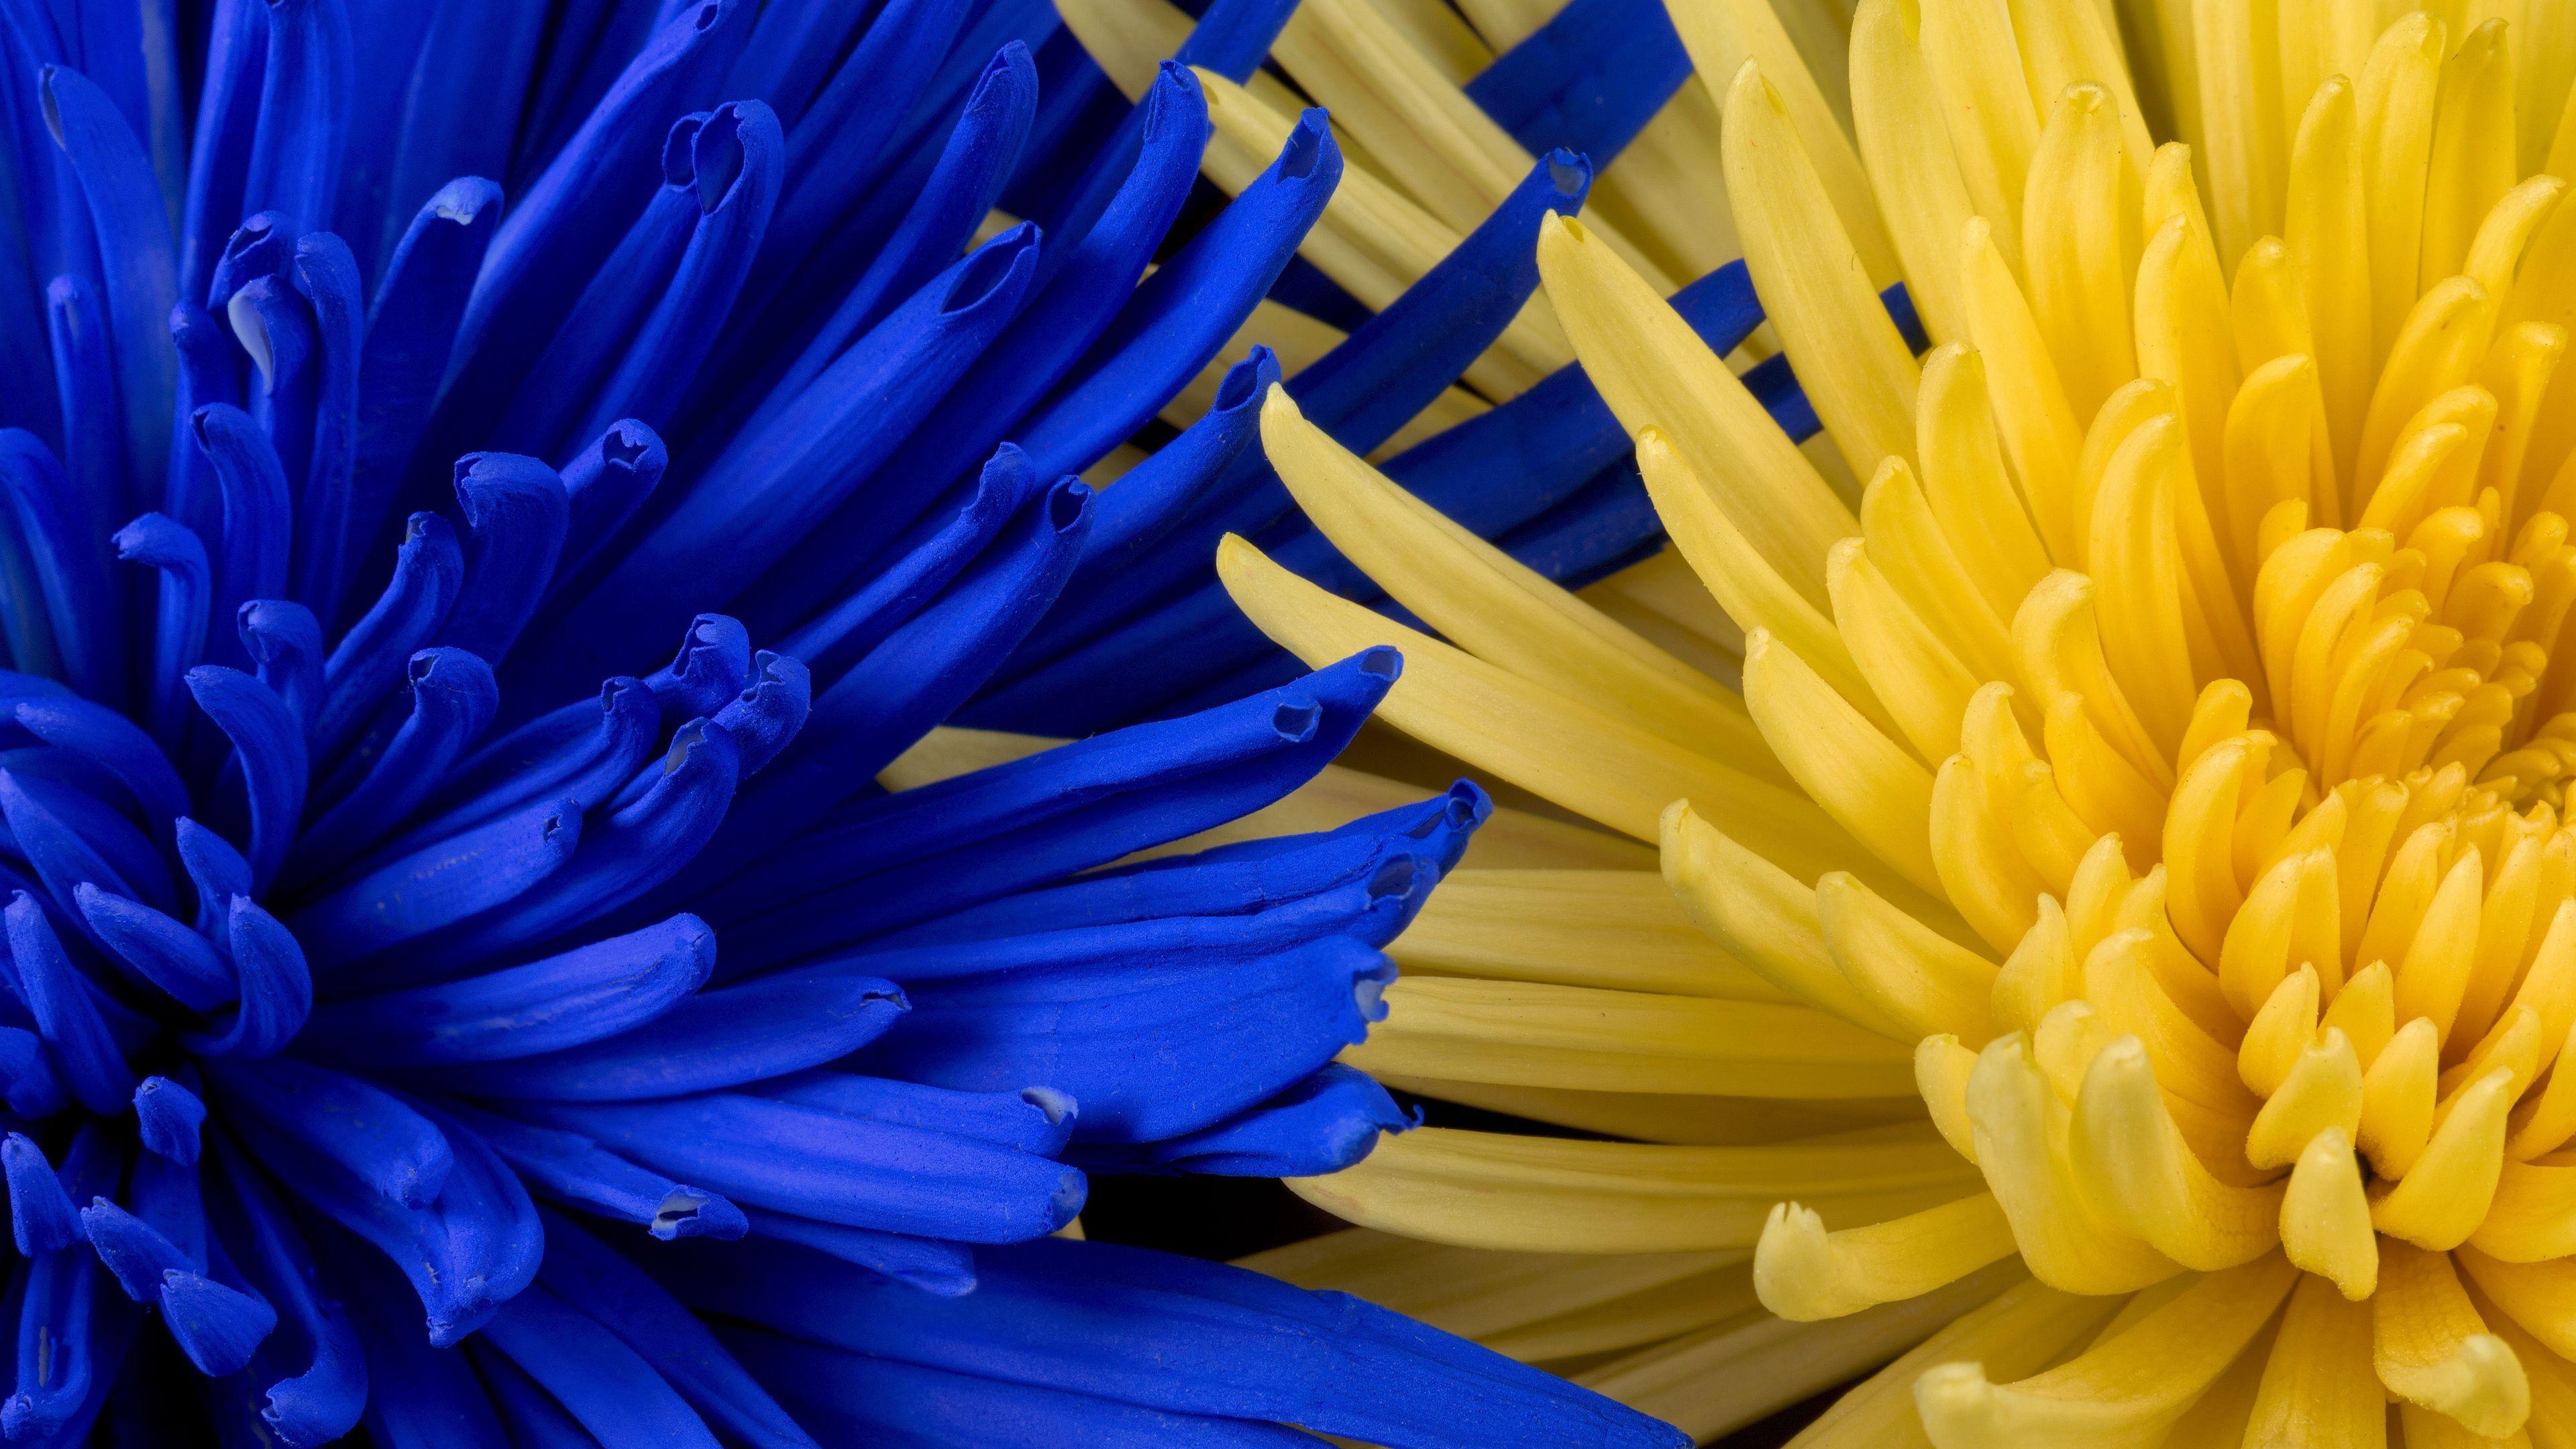 Blue And Yellow Floral Wallpaper